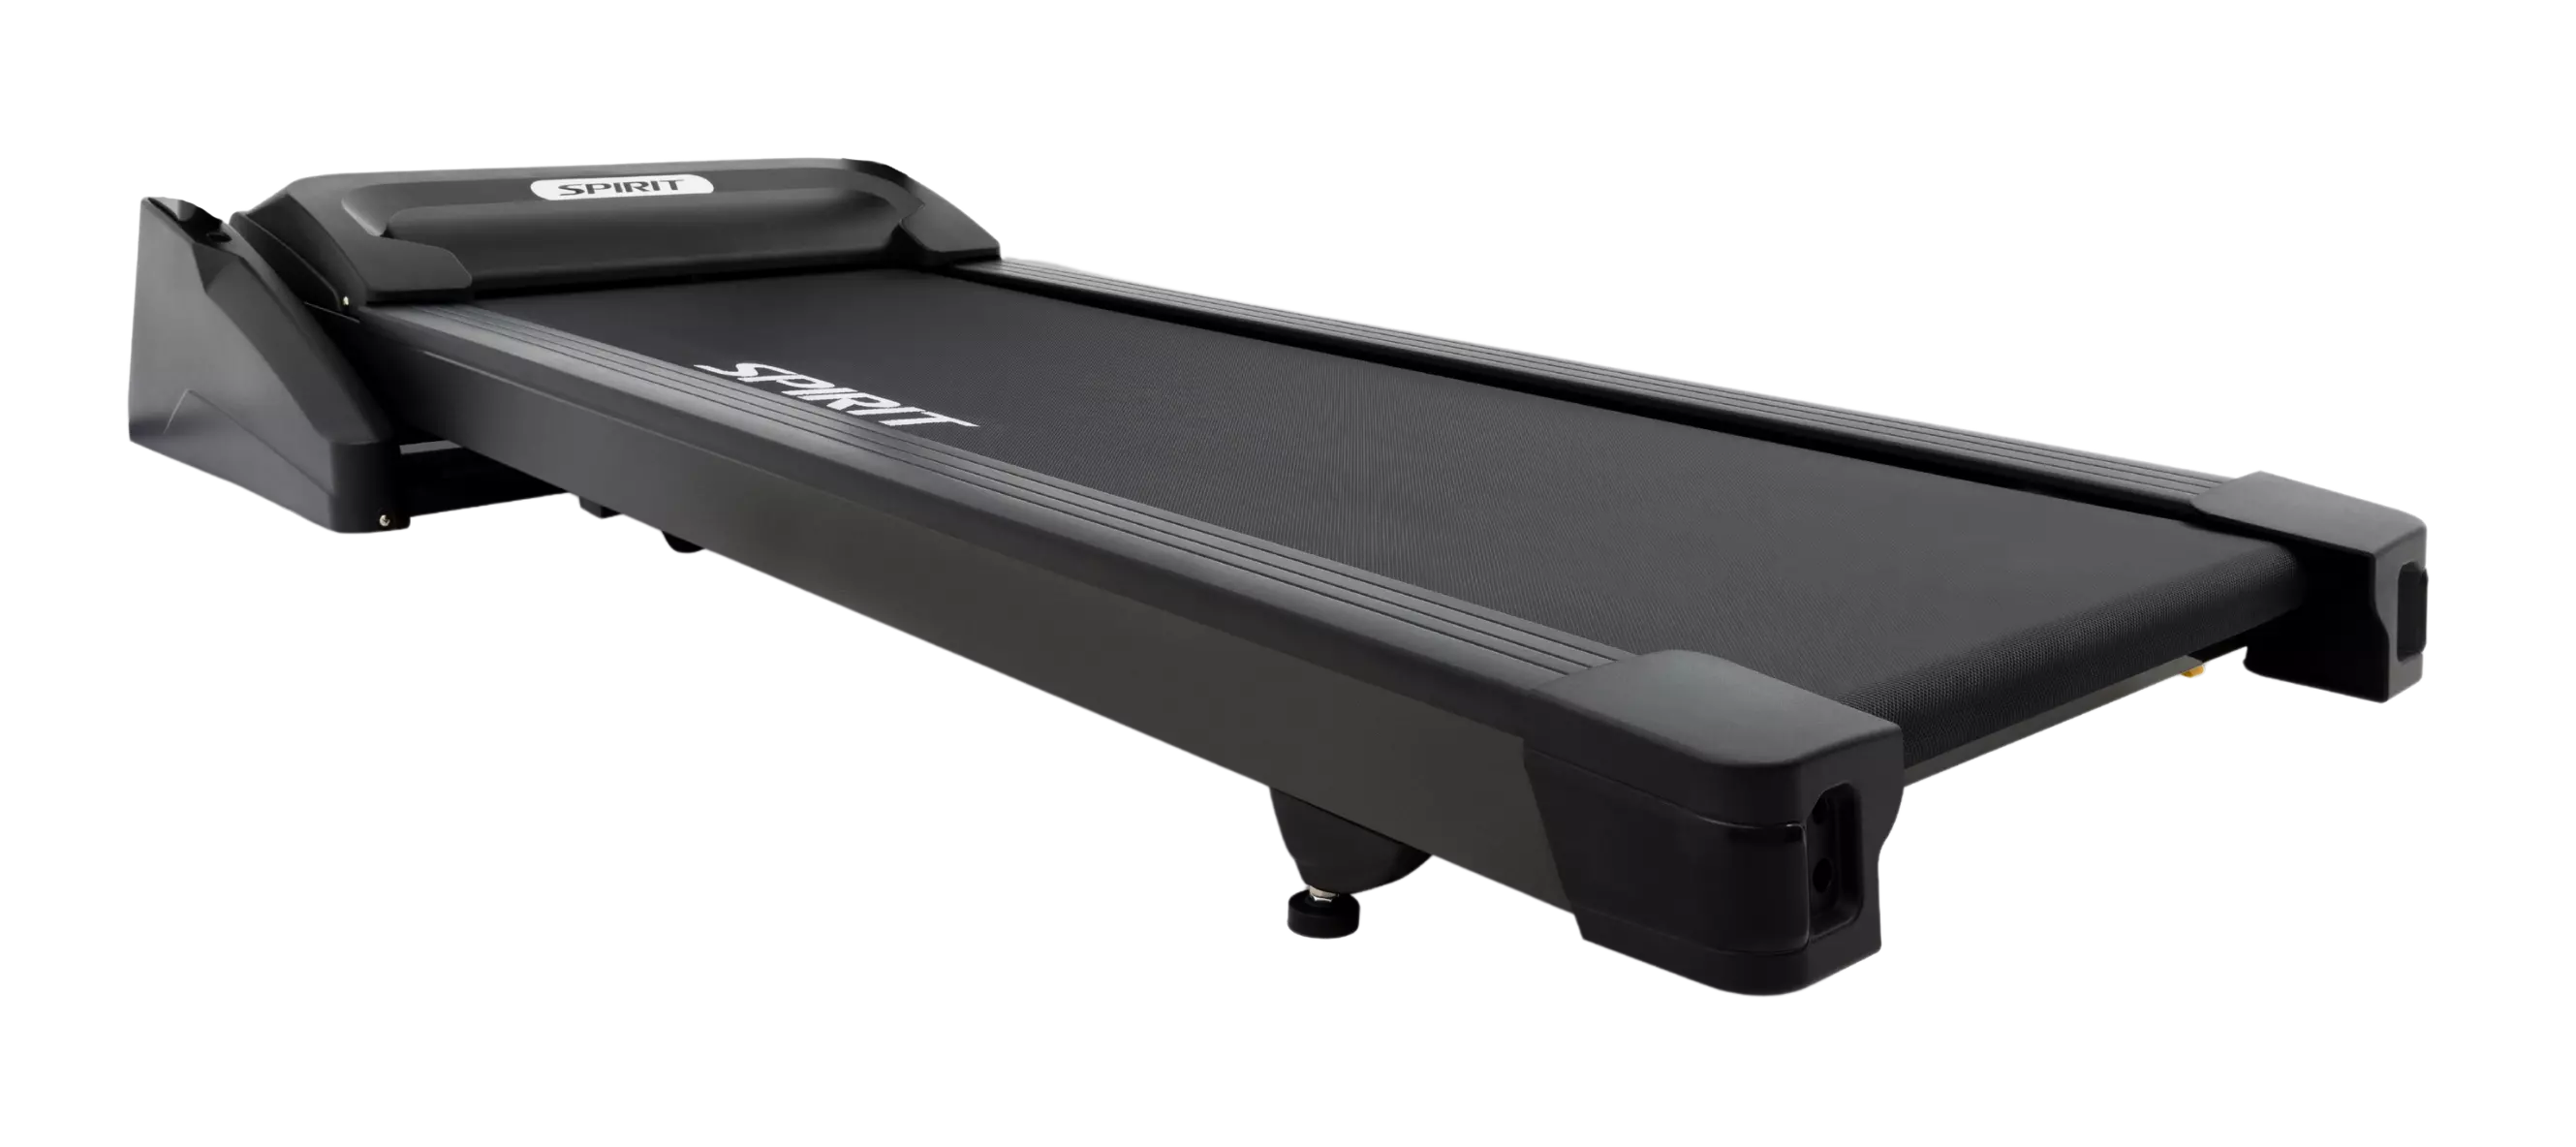 A black treadmill that says spirit on the side - image